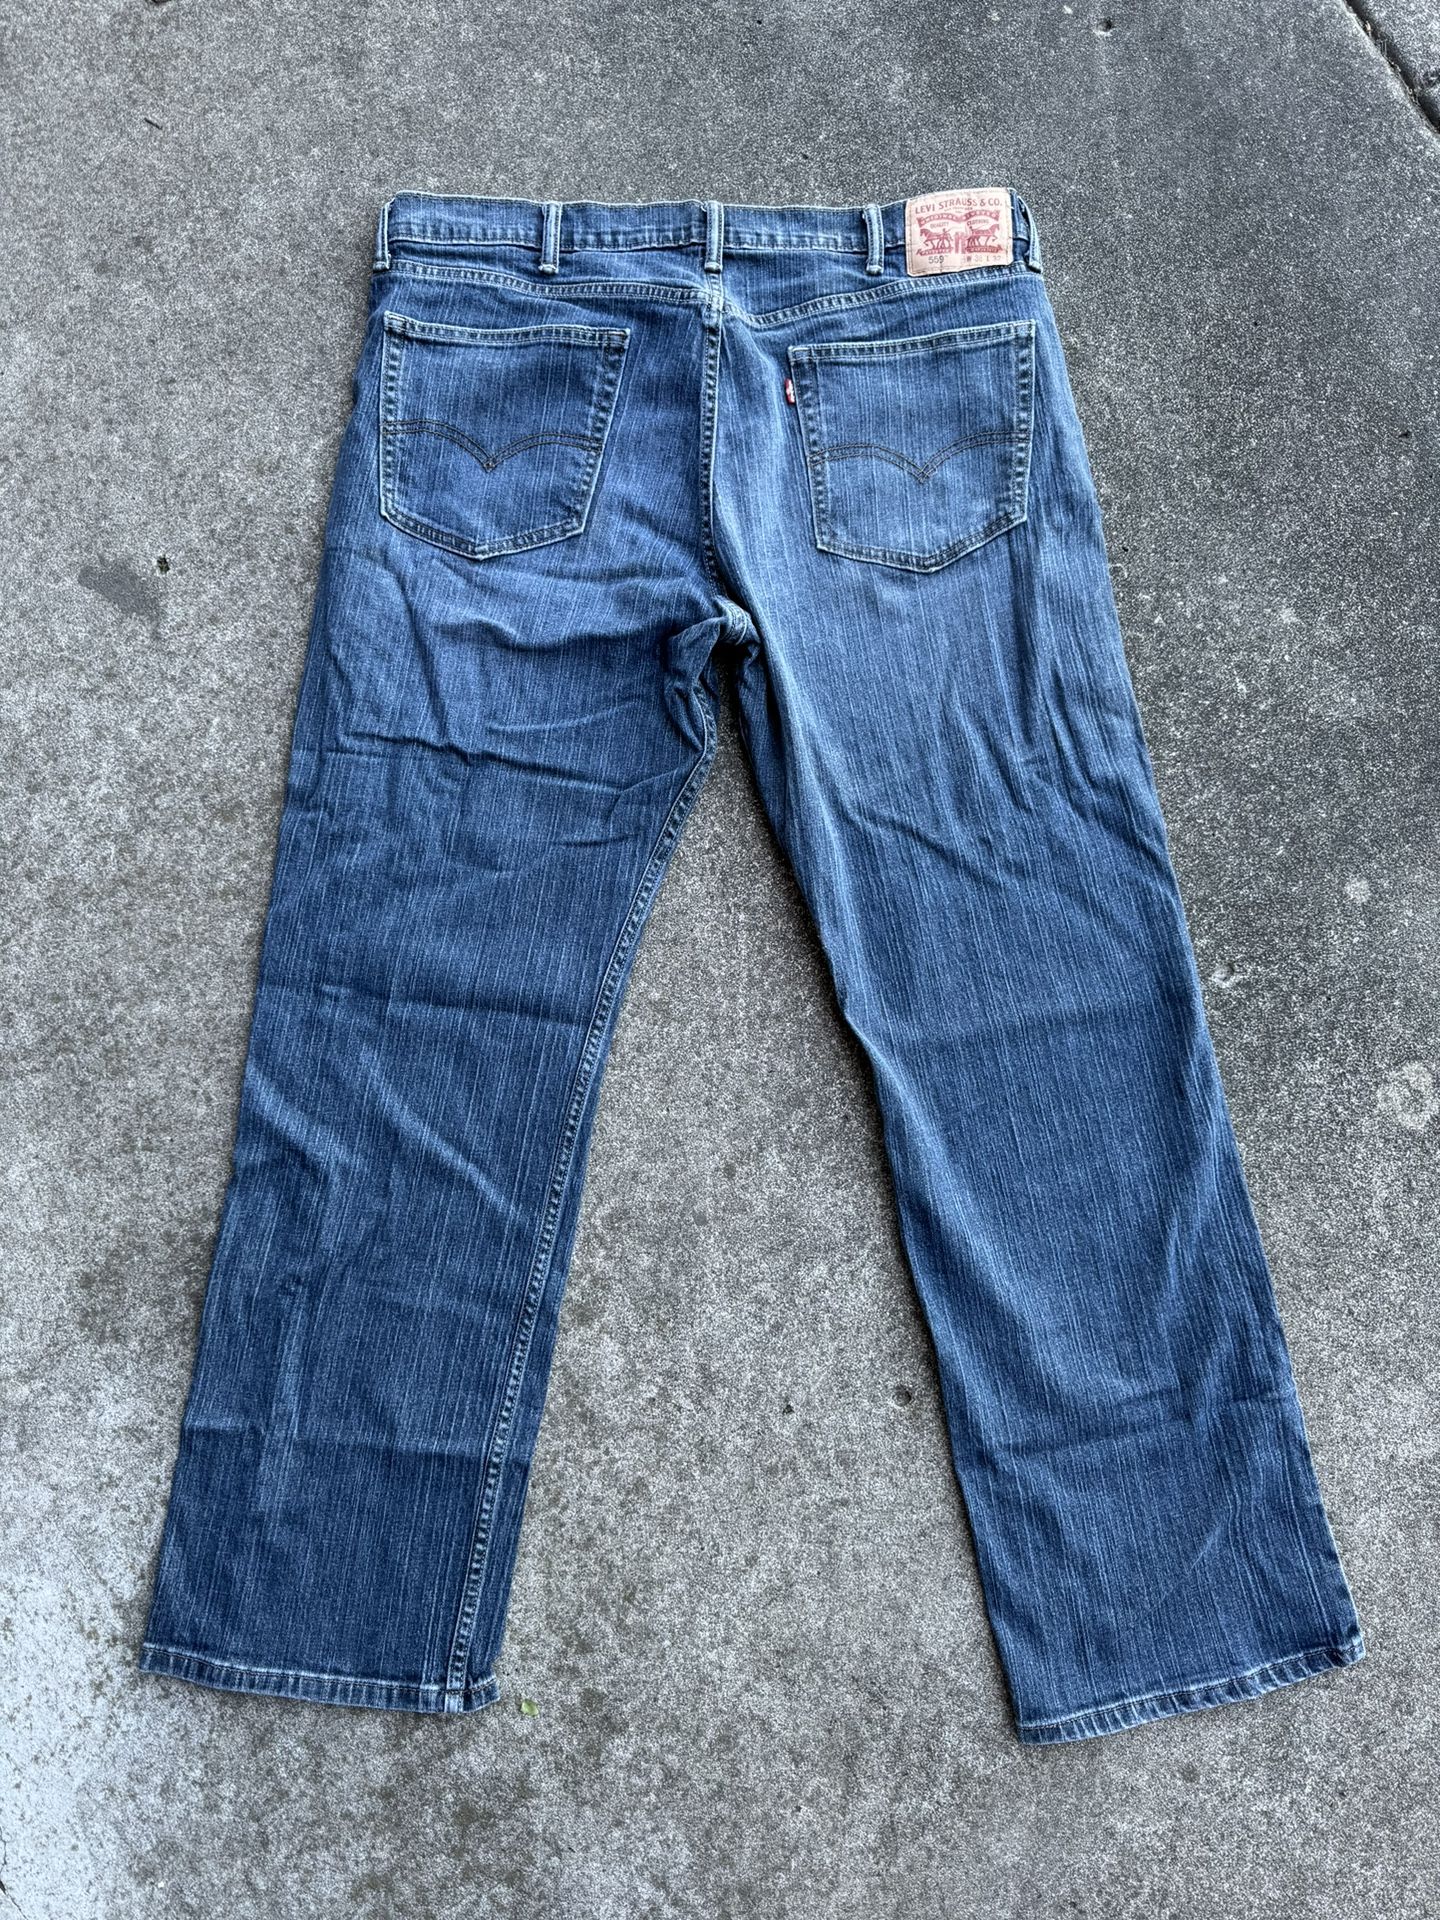 Levi’s Men’s 559 Jeans Shipping Avaialbe 